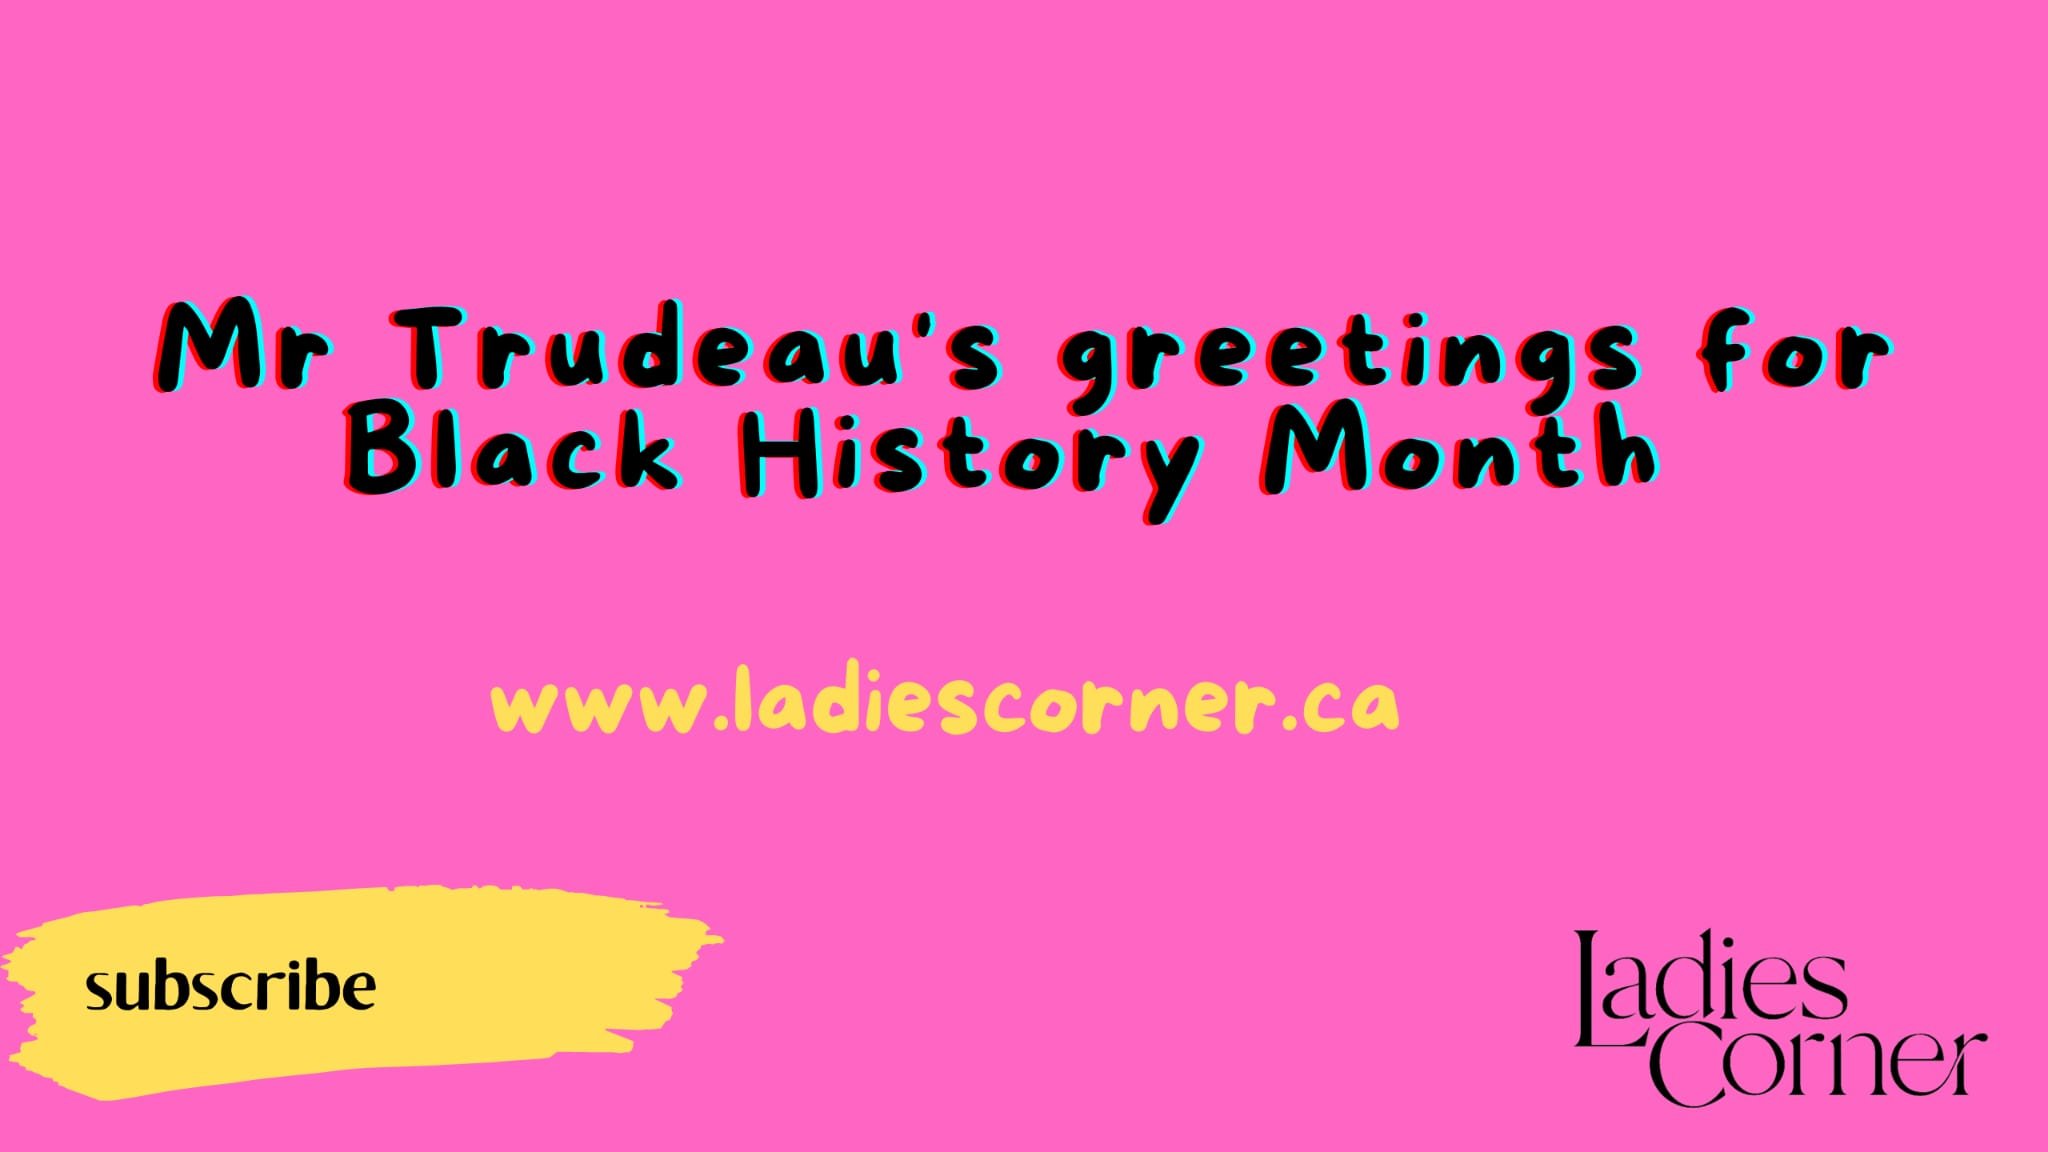 Black History Month greeting from Mr. Justin Trudeau